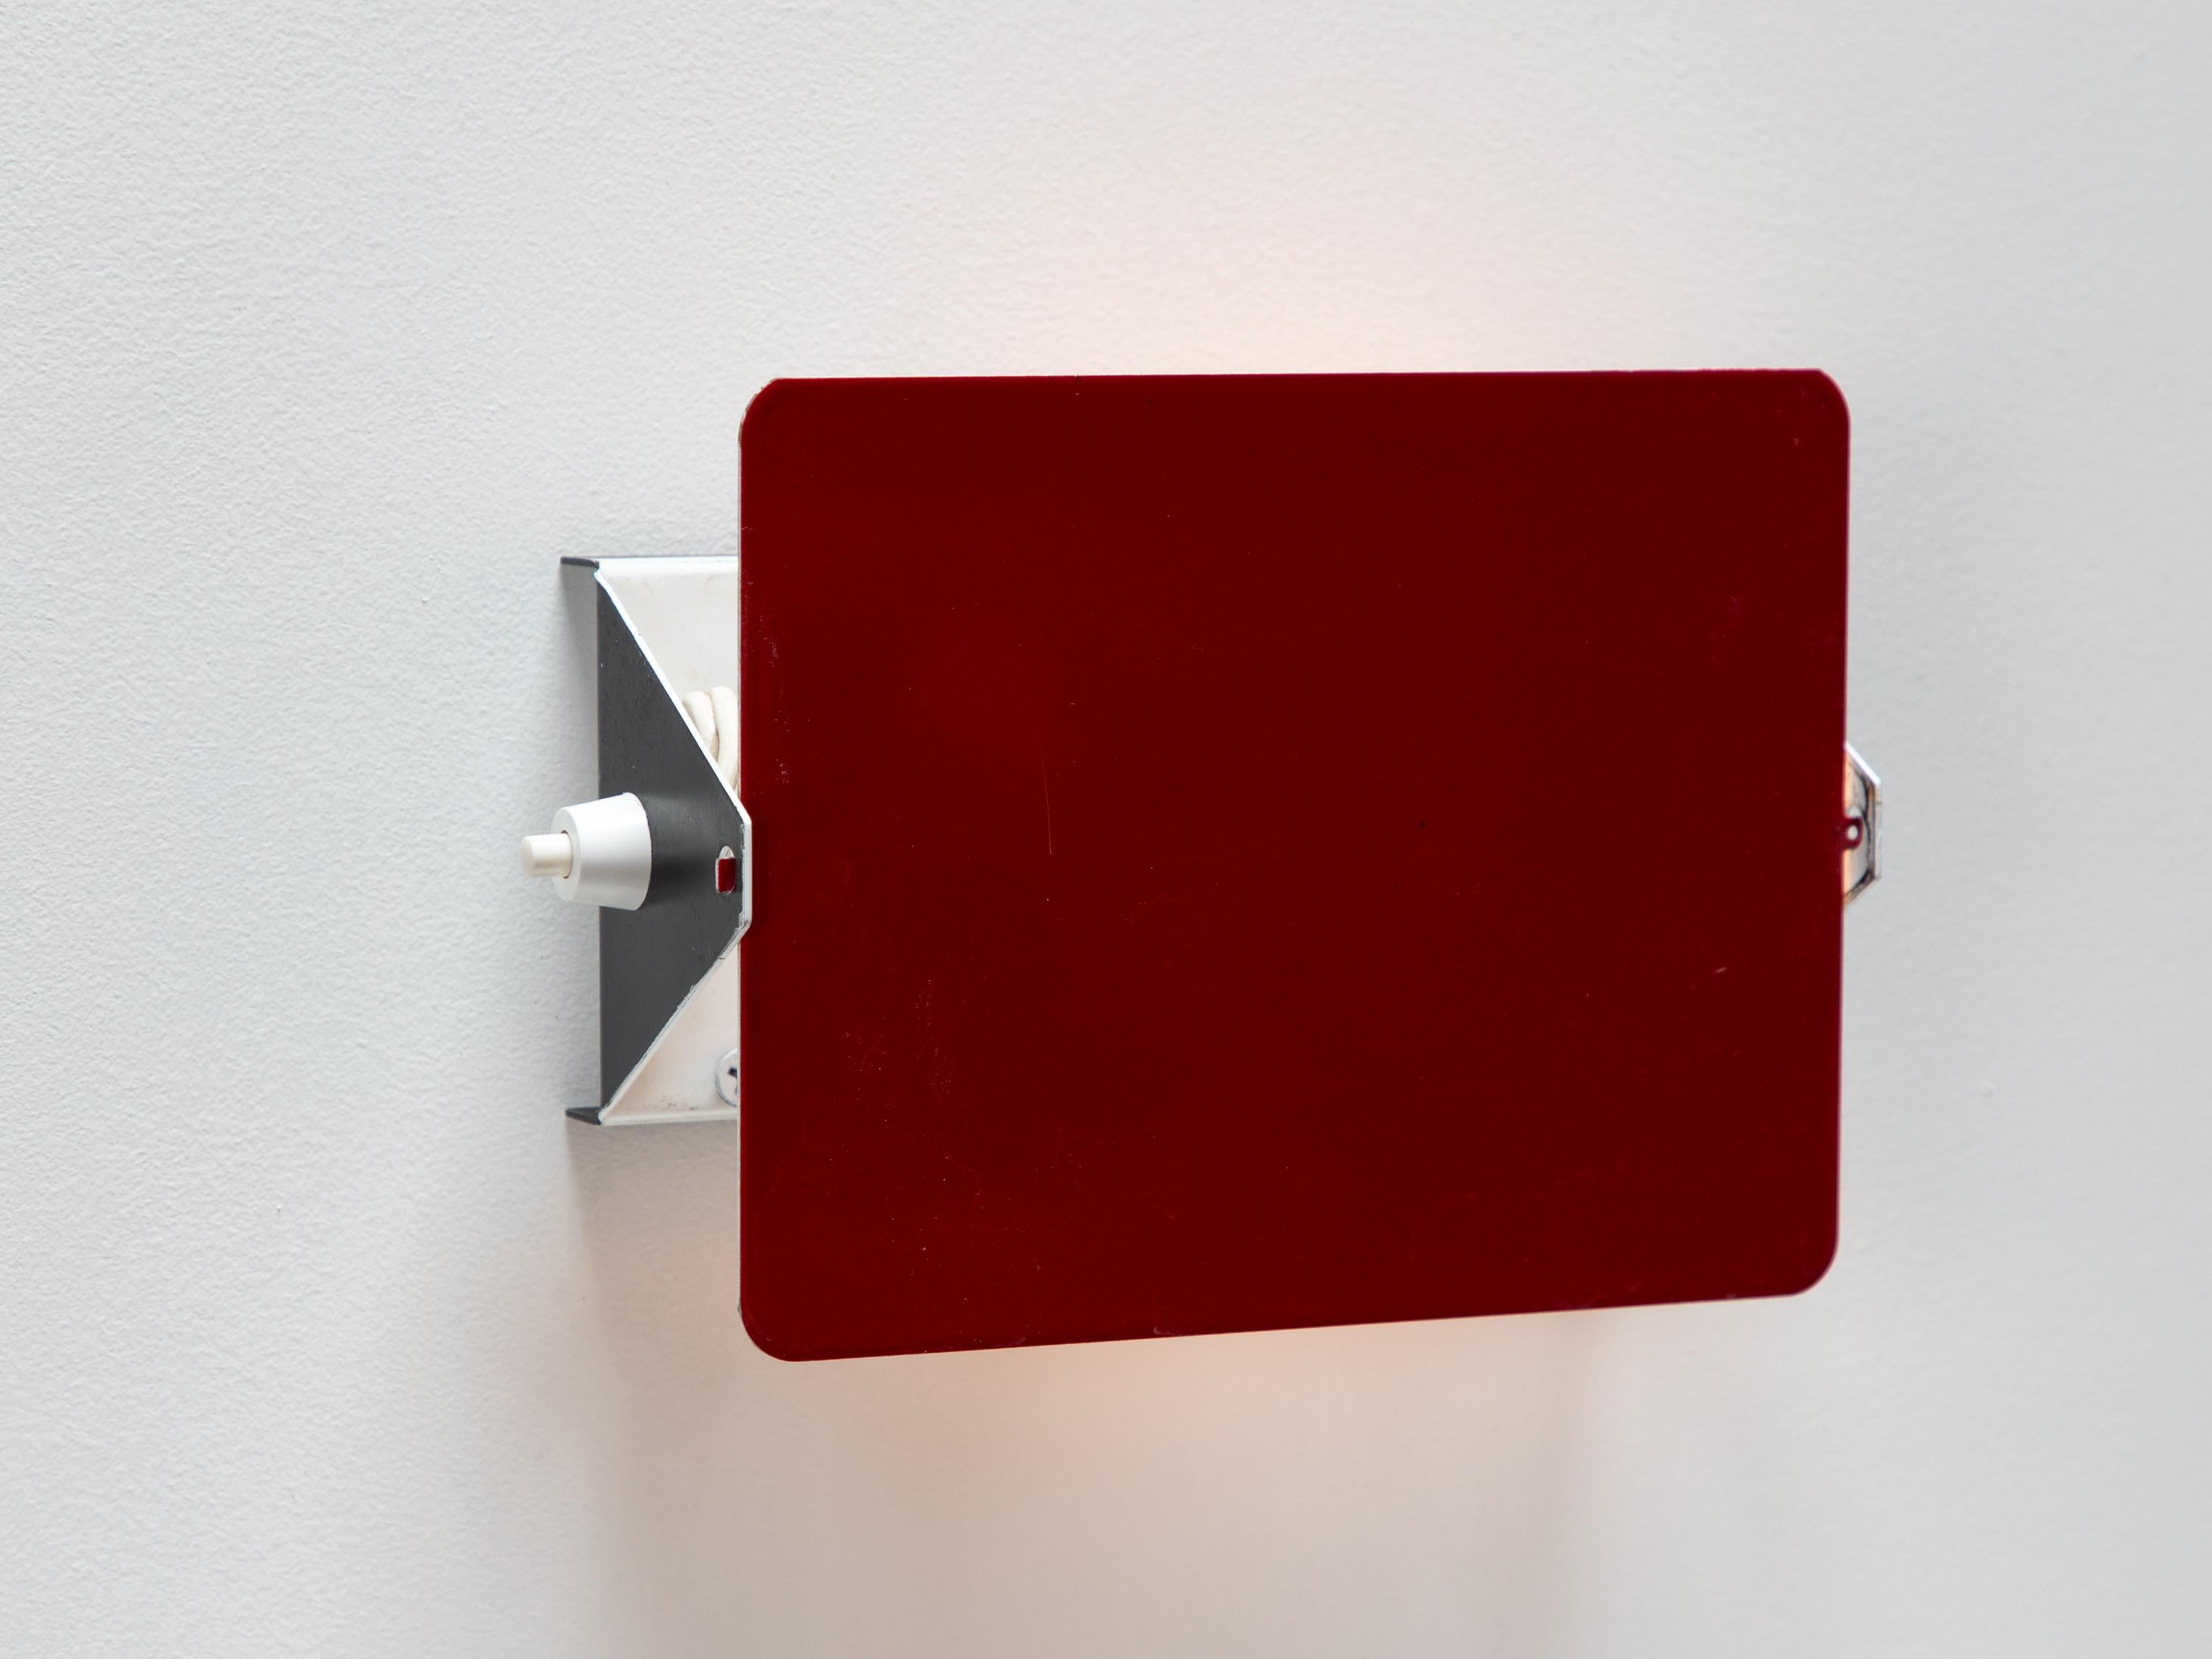 Vintage Charlotte Perriand Les Arcs CP1 Wall Light or Sconces - Crimson Red For Sale 5